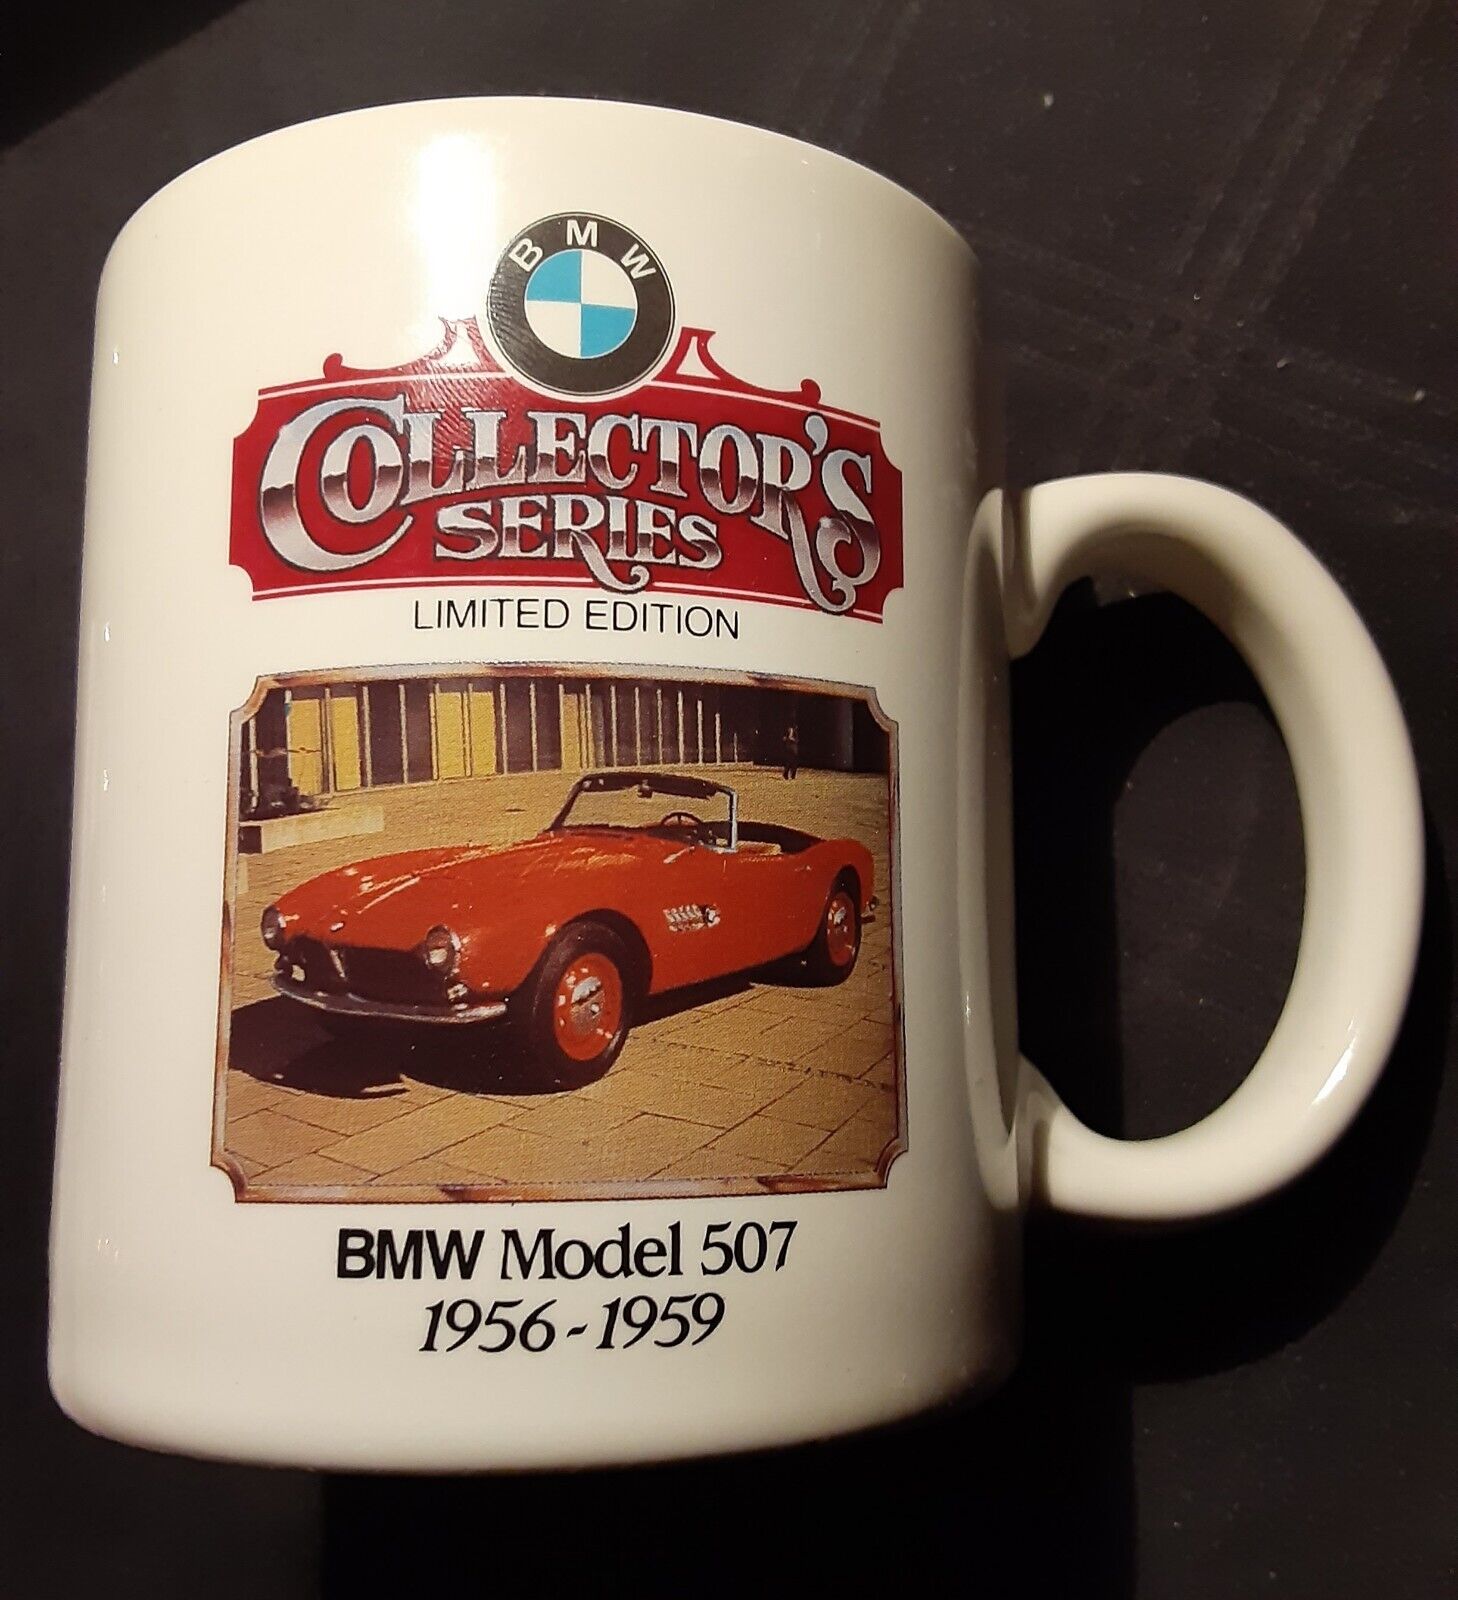 BMW Collector's Series Mug Model 507 produced 1956-1959 Numbered 918 of 3,000